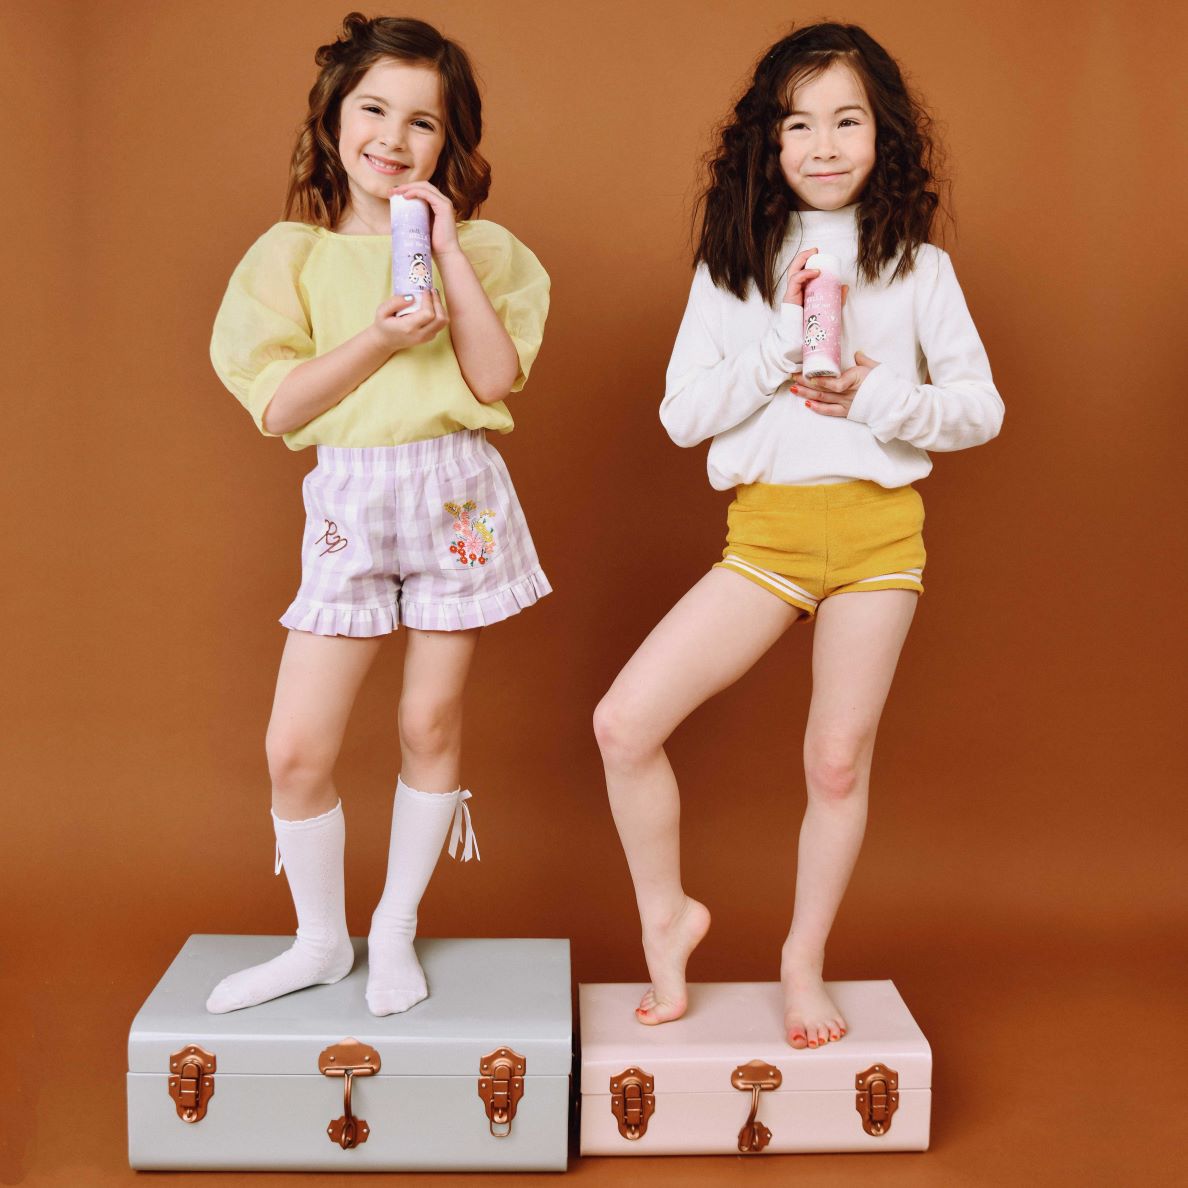 Kids' Roll On Oil Perfume Duo: Irresistible Scents